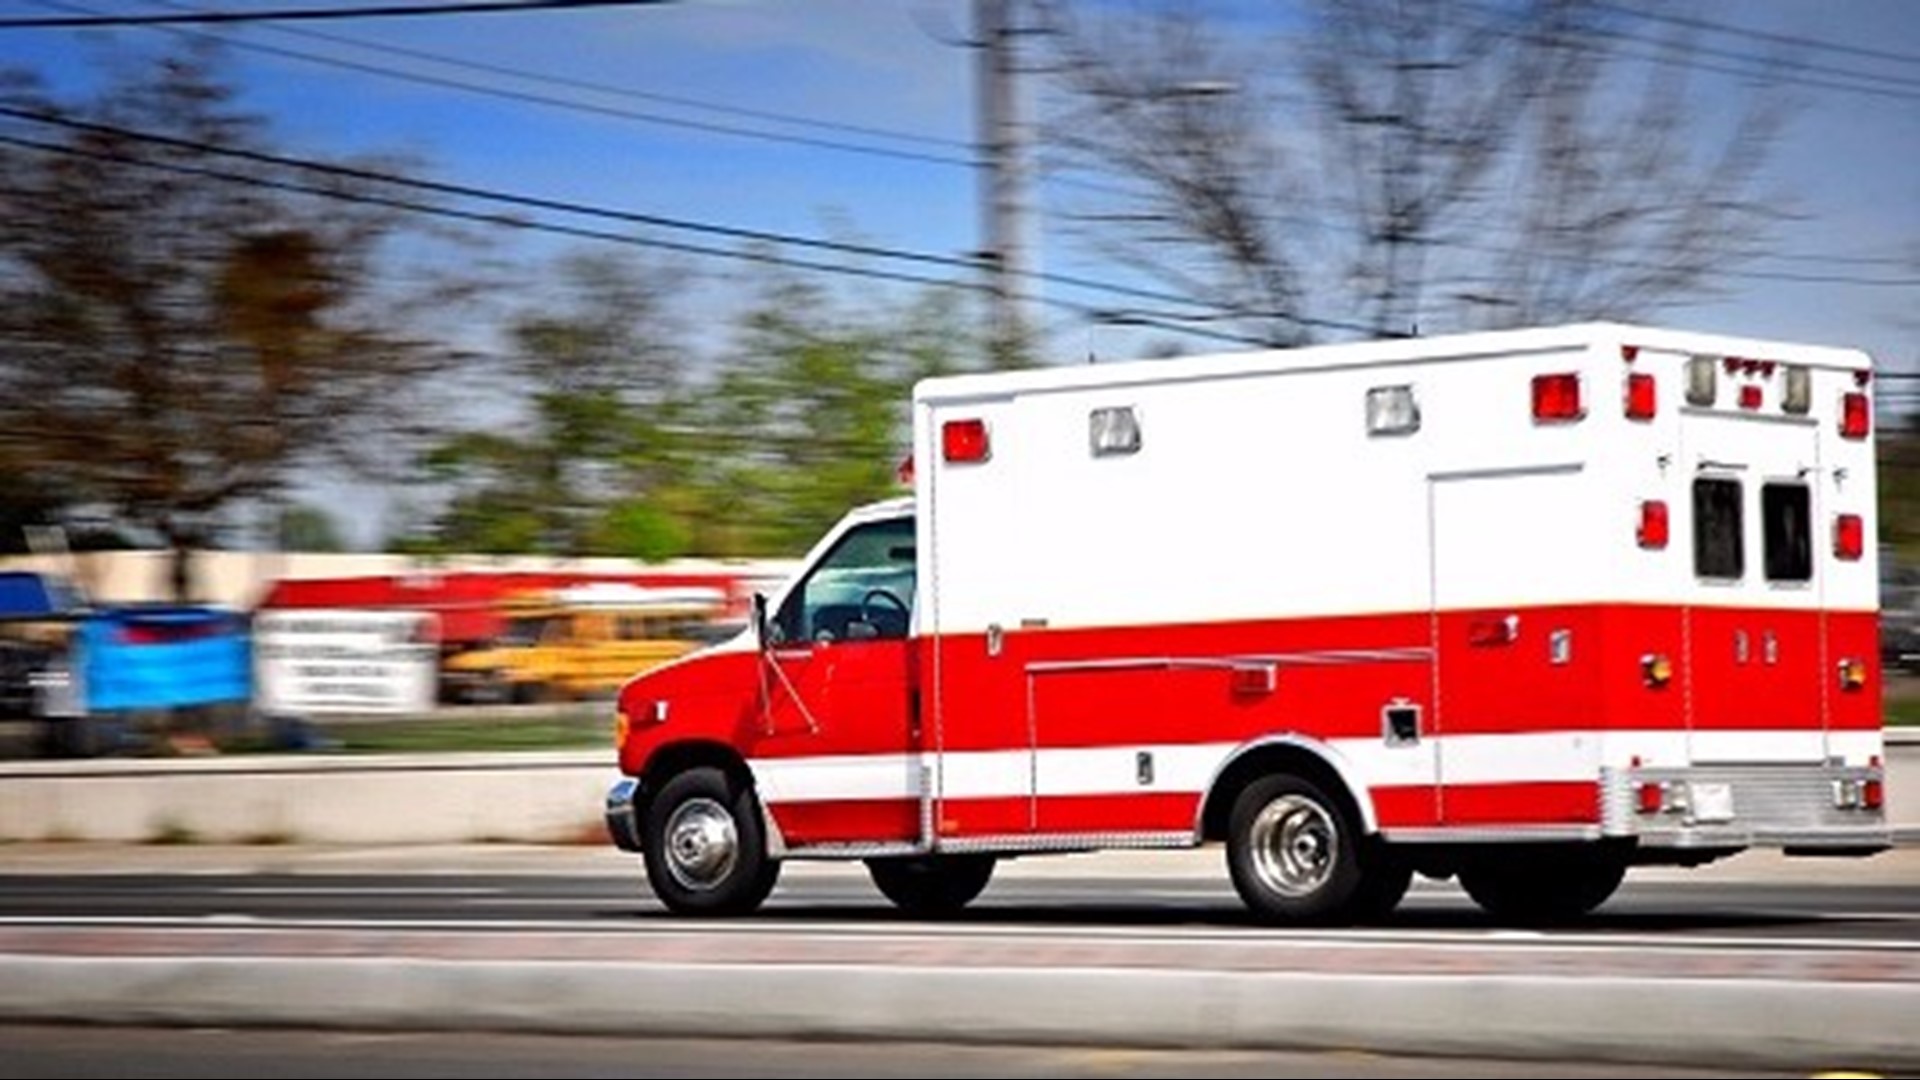 What to do when an emergency vehicle approaches